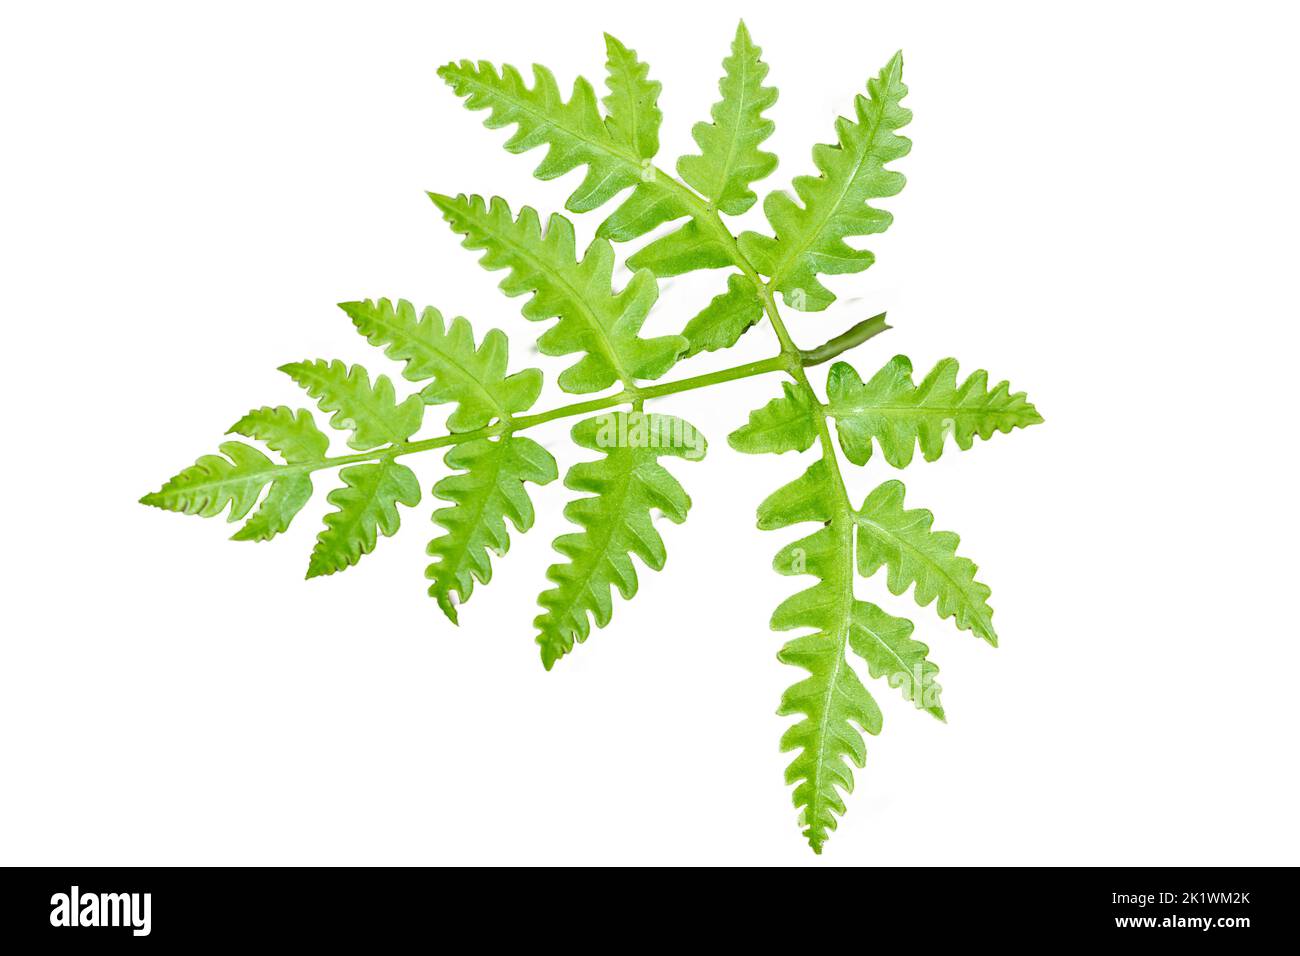 Top view of a green fern leaf with jagged edges, isolated on a white background Stock Photo